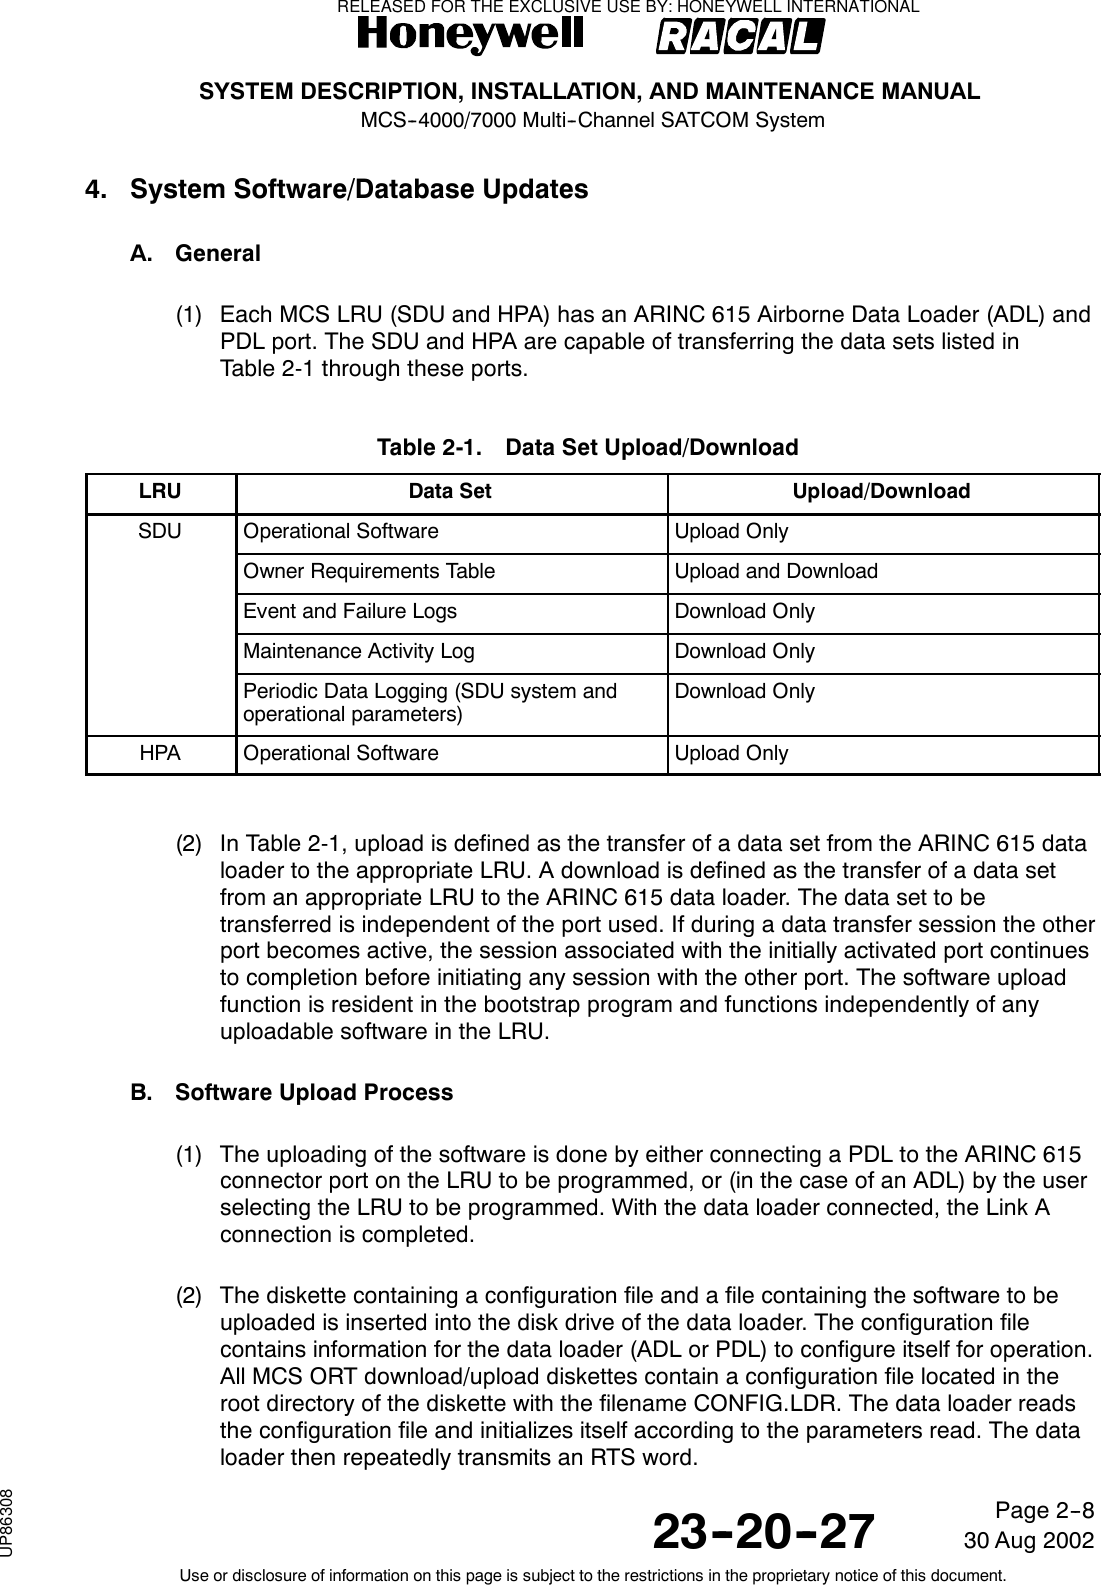 SYSTEM DESCRIPTION, INSTALLATION, AND MAINTENANCE MANUALMCS--4000/7000 Multi--Channel SATCOM System23--20--2730 Aug 2002Use or disclosure of information on this page is subject to the restrictions in the proprietary notice of this document.Page 2--84. System Software/Database UpdatesA. General(1) Each MCS LRU (SDU and HPA) has an ARINC 615 Airborne Data Loader (ADL) andPDL port. The SDU and HPA are capable of transferring the data sets listed inTable 2-1 through these ports.Table 2-1. Data Set Upload/DownloadLRU Data Set Upload/DownloadSDU Operational Software Upload OnlyOwner Requirements Table Upload and DownloadEvent and Failure Logs Download OnlyMaintenance Activity Log Download OnlyPeriodic Data Logging (SDU system andoperational parameters)Download OnlyHPA Operational Software Upload Only(2) In Table 2-1, upload is defined as the transfer of a data set from the ARINC 615 dataloader to the appropriate LRU. A download is defined as the transfer of a data setfrom an appropriate LRU to the ARINC 615 data loader. The data set to betransferred is independent of the port used. If during a data transfer session the otherport becomes active, the session associated with the initially activated port continuesto completion before initiating any session with the other port. The software uploadfunction is resident in the bootstrap program and functions independently of anyuploadable software in the LRU.B. Software Upload Process(1) The uploading of the software is done by either connecting a PDL to the ARINC 615connector port on the LRU to be programmed, or (in the case of an ADL) by the userselecting the LRU to be programmed. With the data loader connected, the Link Aconnection is completed.(2) The diskette containing a configuration file and a file containing the software to beuploaded is inserted into the disk drive of the data loader. The configuration filecontains information for the data loader (ADL or PDL) to configure itself for operation.All MCS ORT download/upload diskettes contain a configuration file located in theroot directory of the diskette with the filename CONFIG.LDR. The data loader readsthe configuration file and initializes itself according to the parameters read. The dataloader then repeatedly transmits an RTS word.RELEASED FOR THE EXCLUSIVE USE BY: HONEYWELL INTERNATIONALUP86308